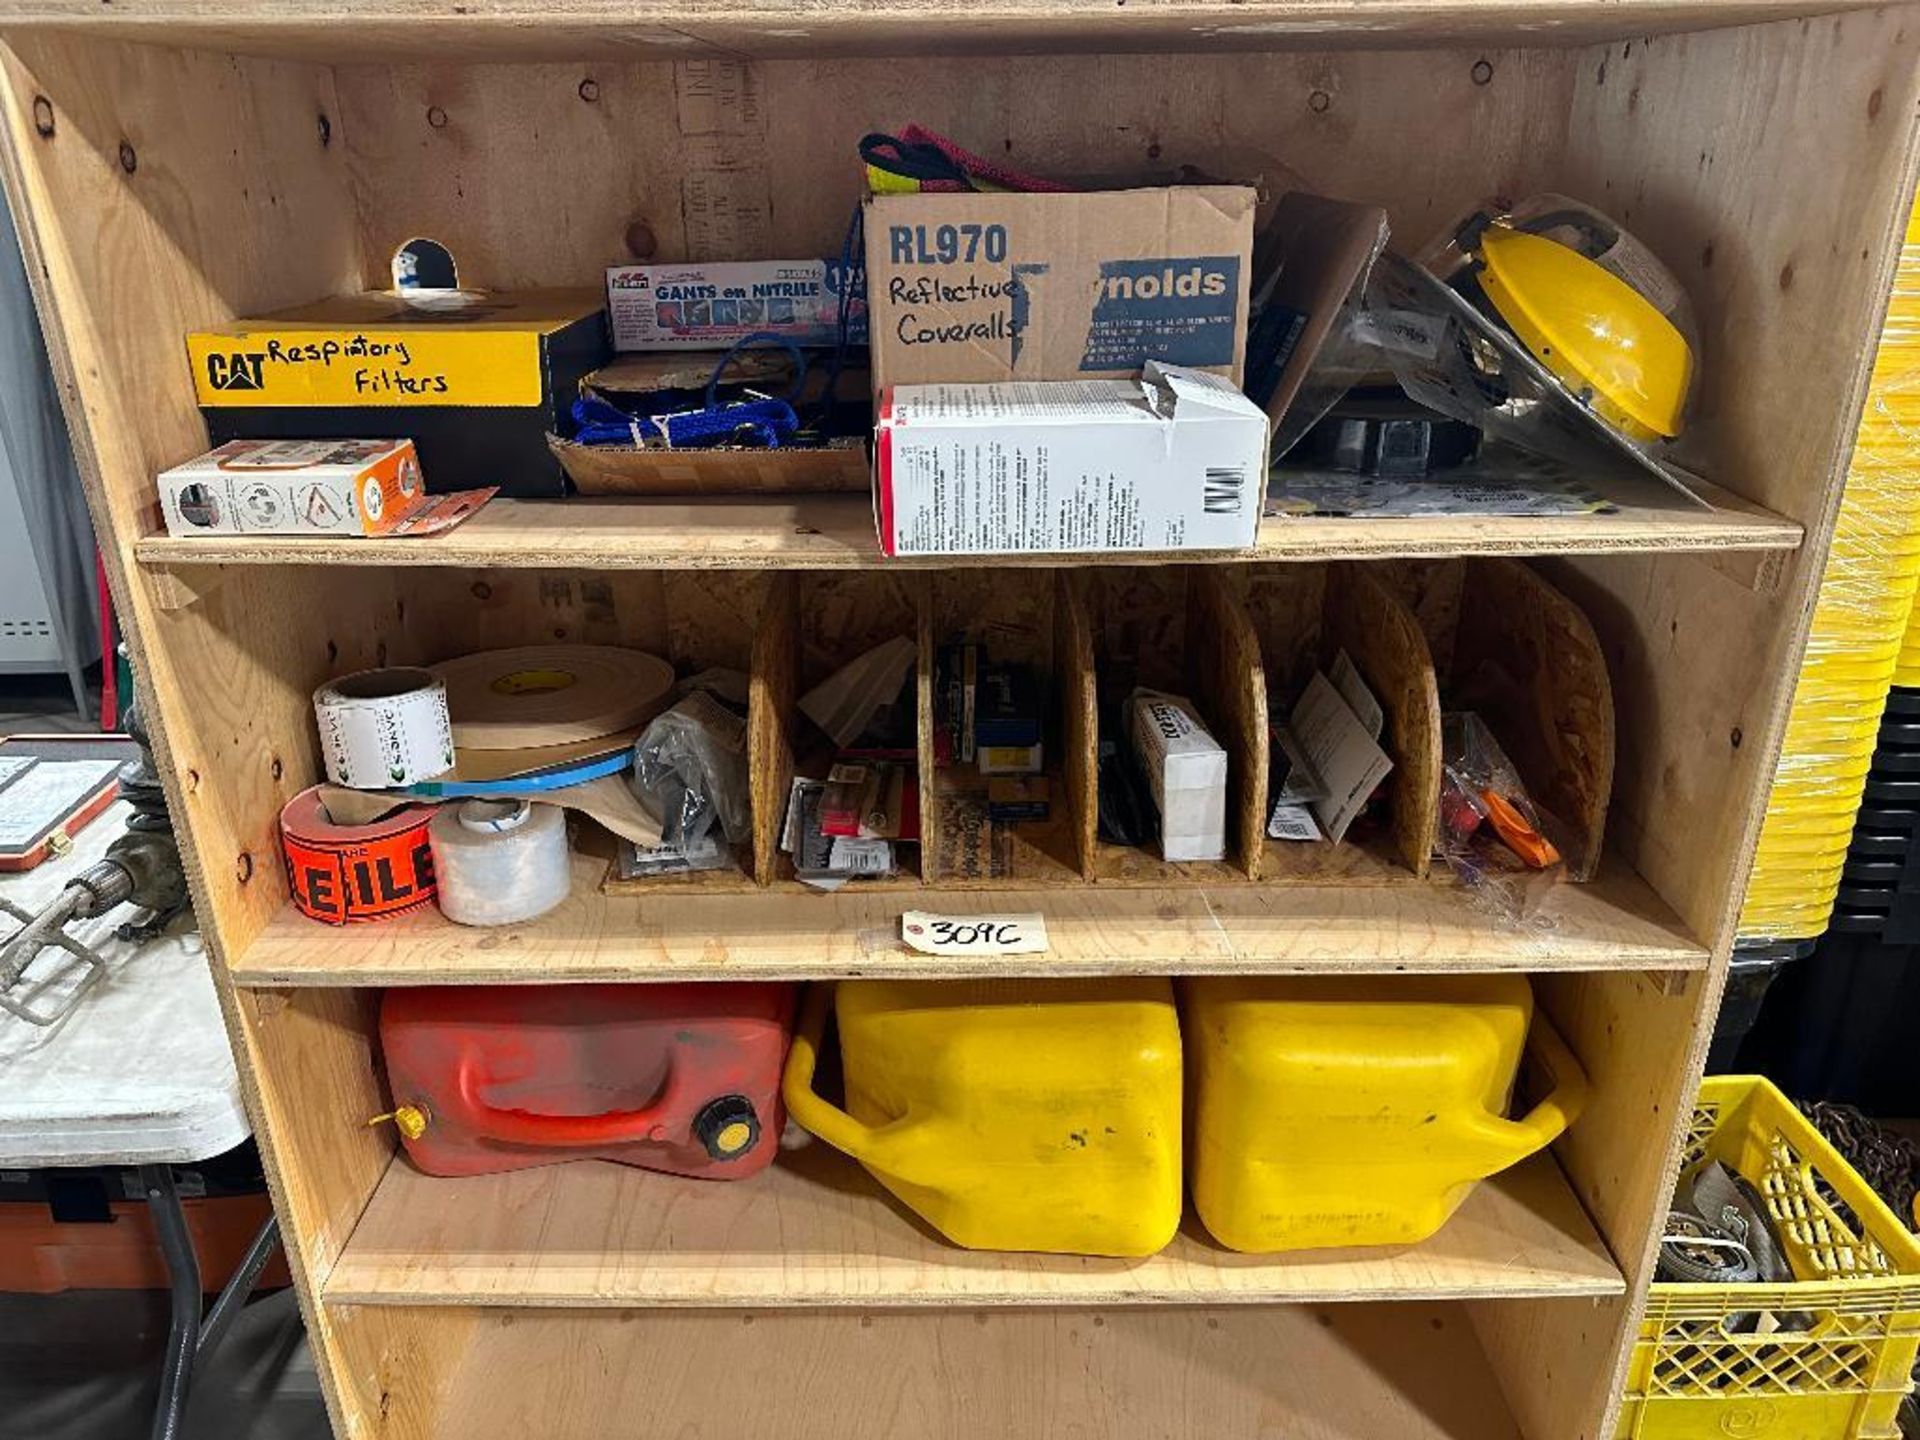 Contents of Wooden Shelf including Fuel Cans, Face Shield Headgear, Straps, etc.